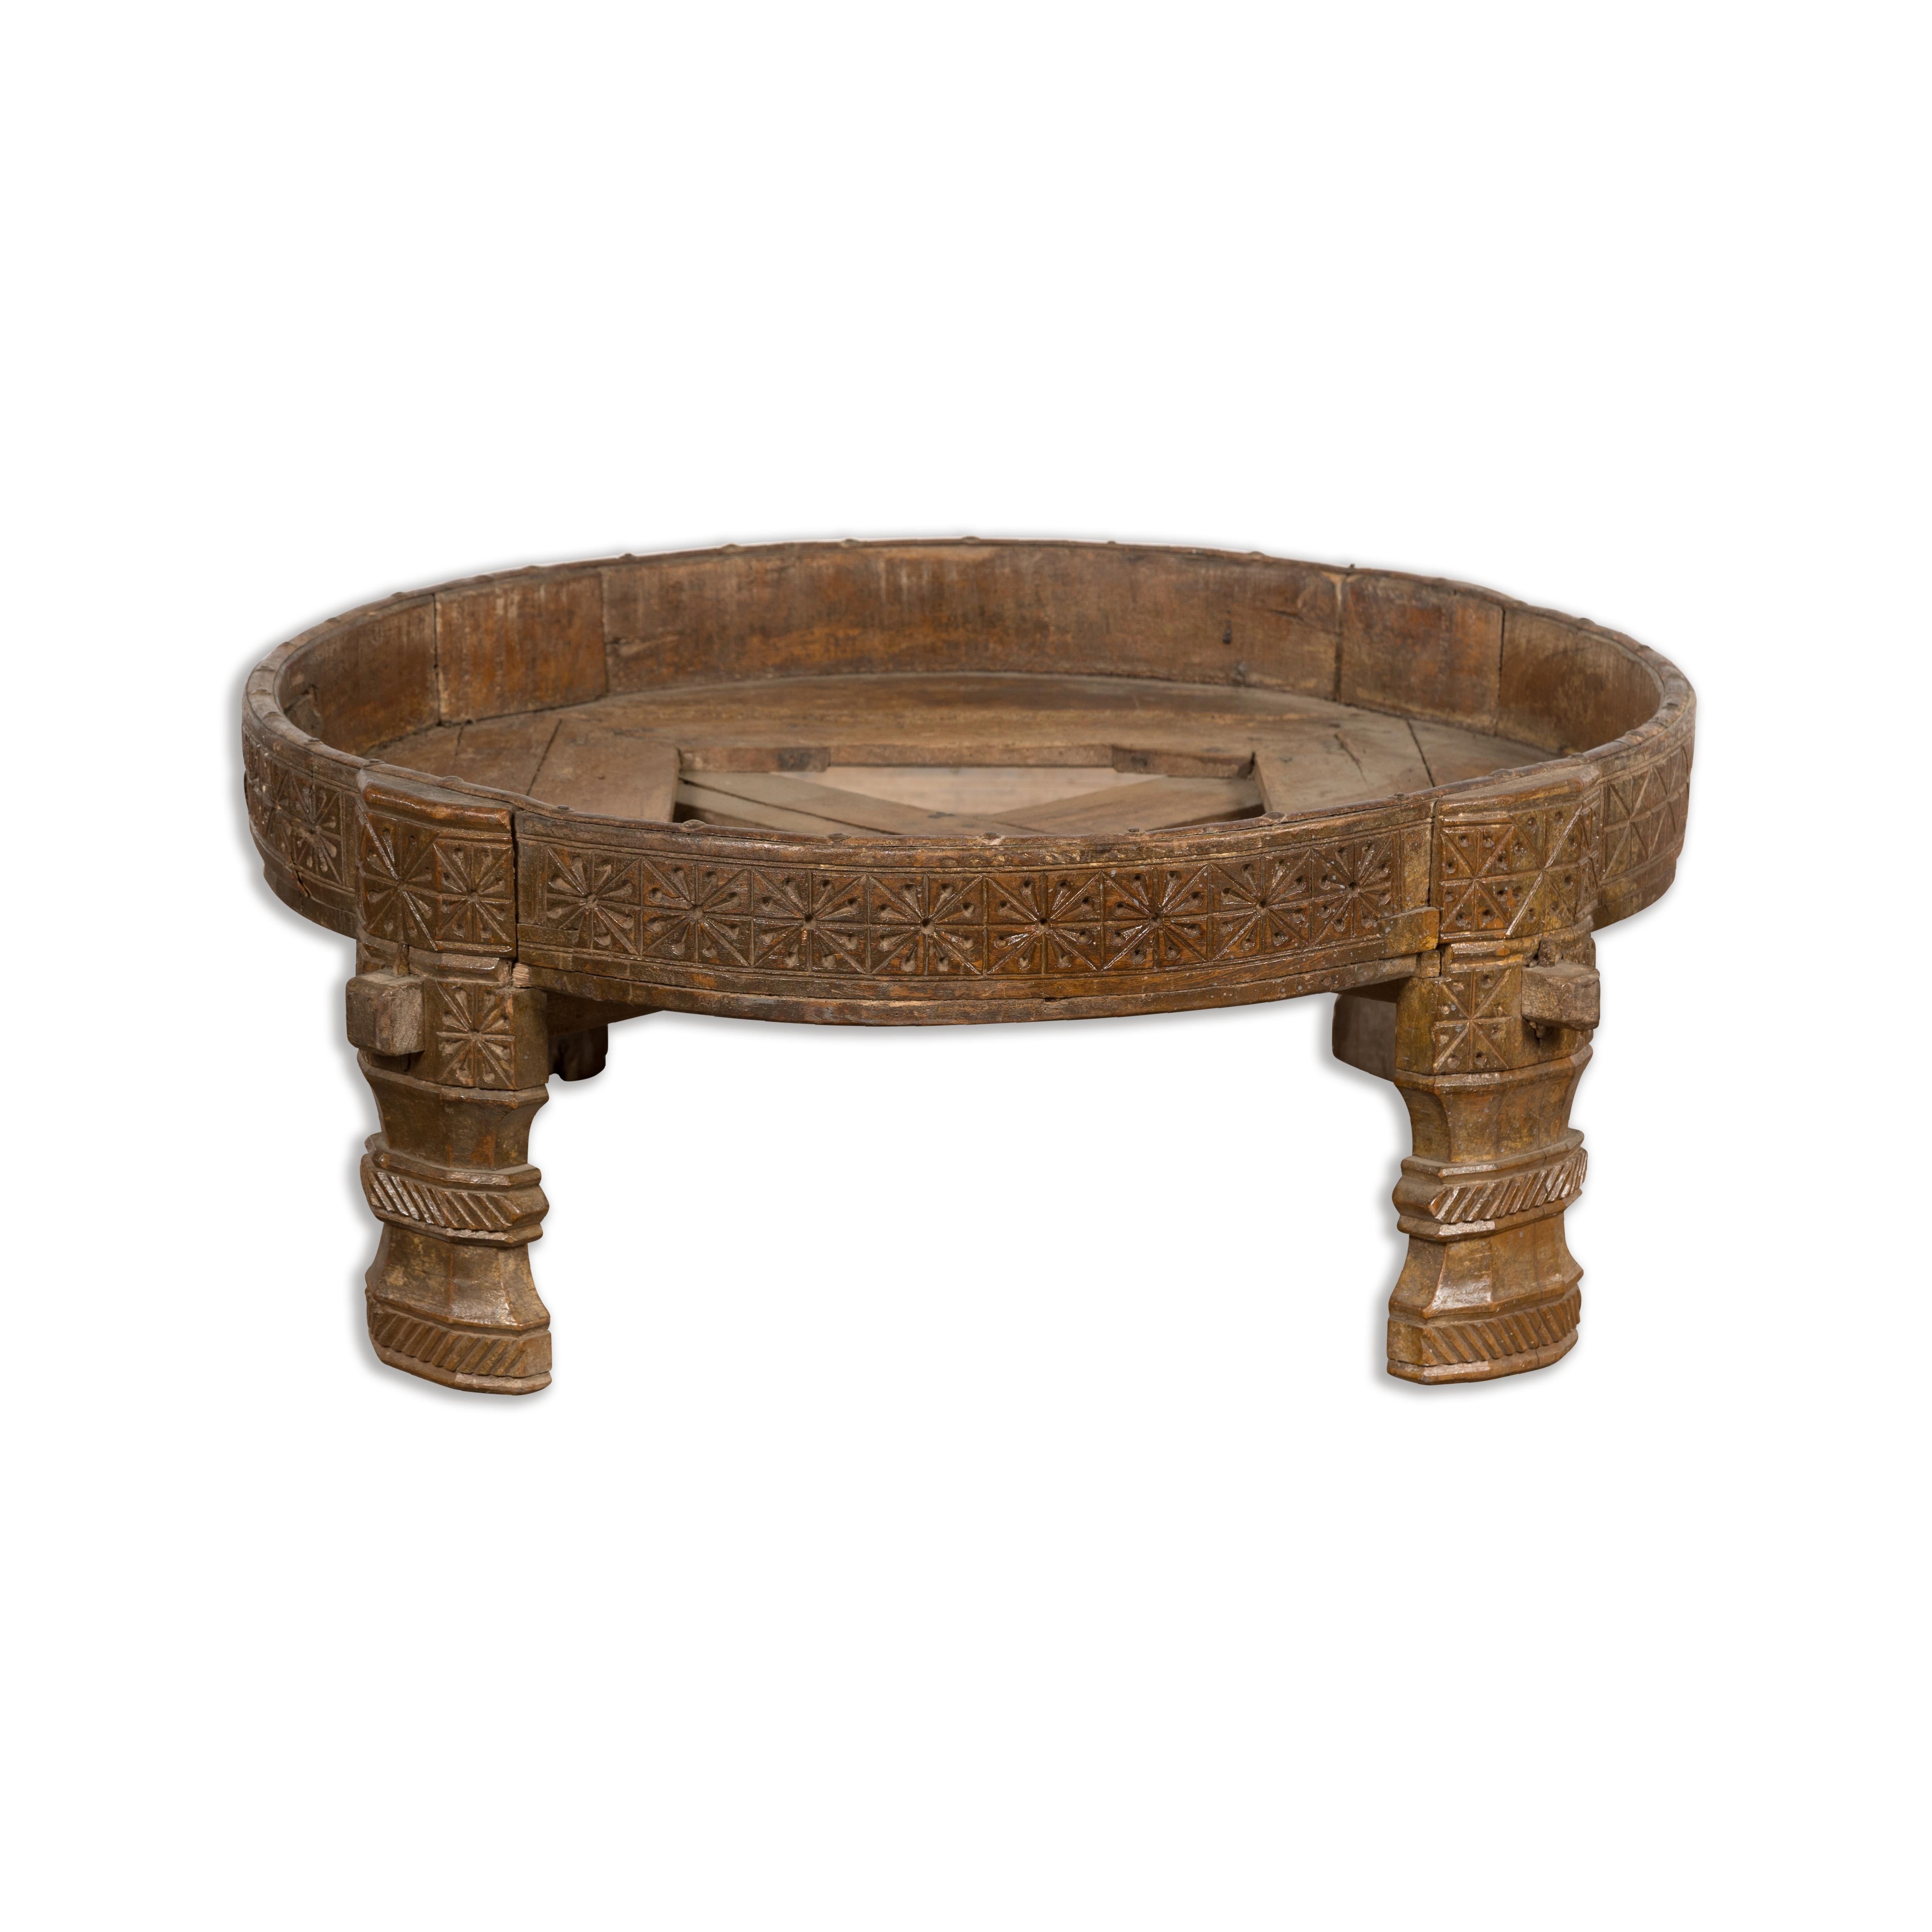 1920s Indian Antique Chakki Grinding Table with Hand-Carved Geometric Décor For Sale 6